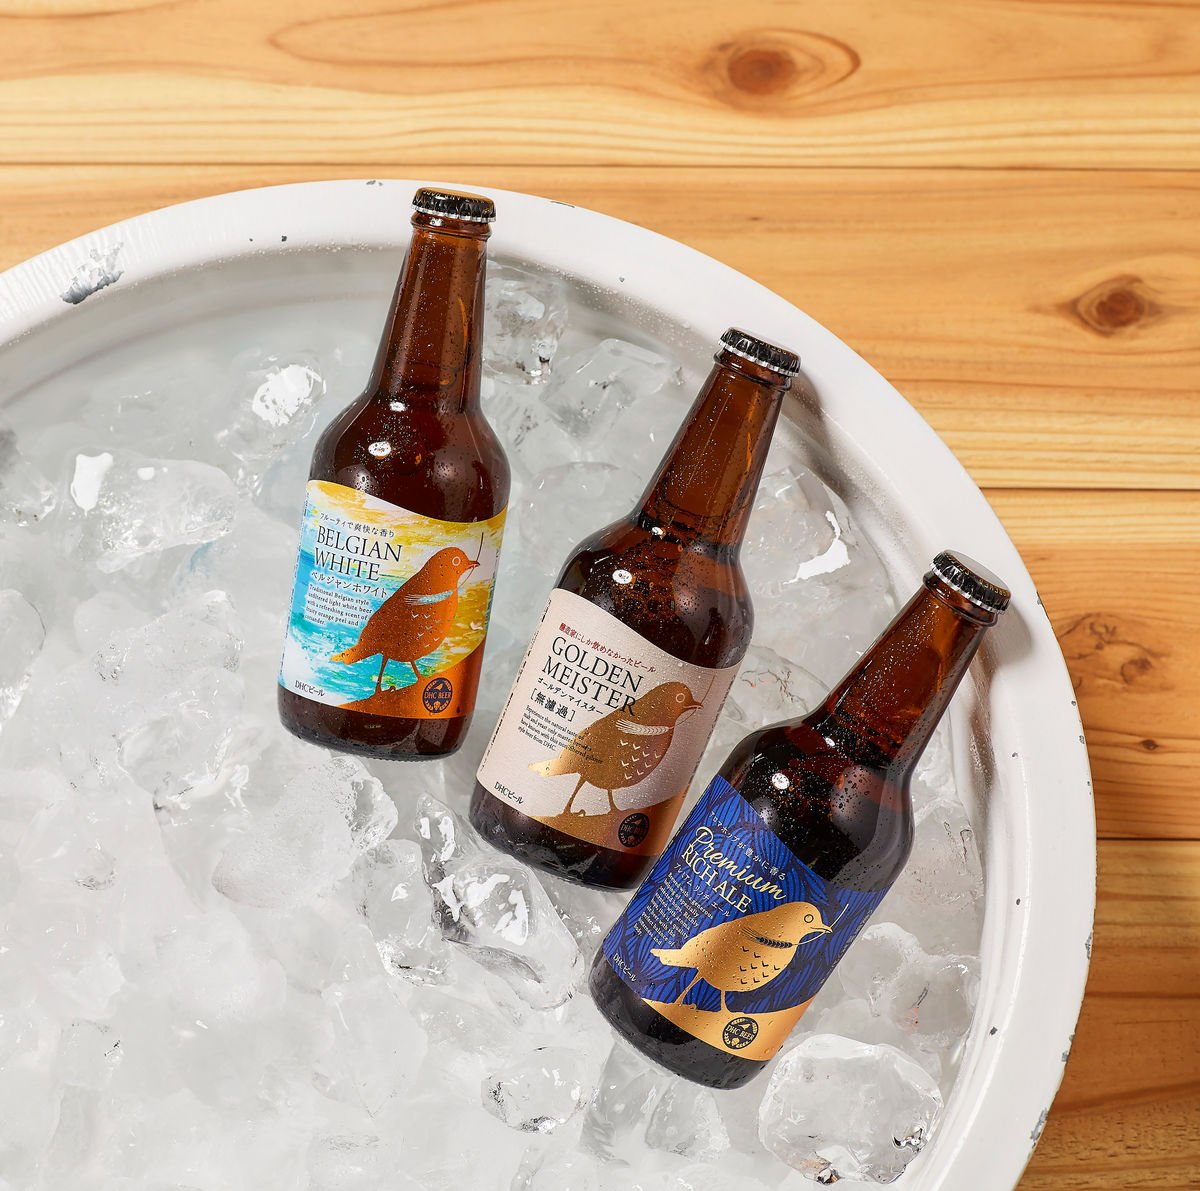 dhc beer co. beers chilling in an ice bucket